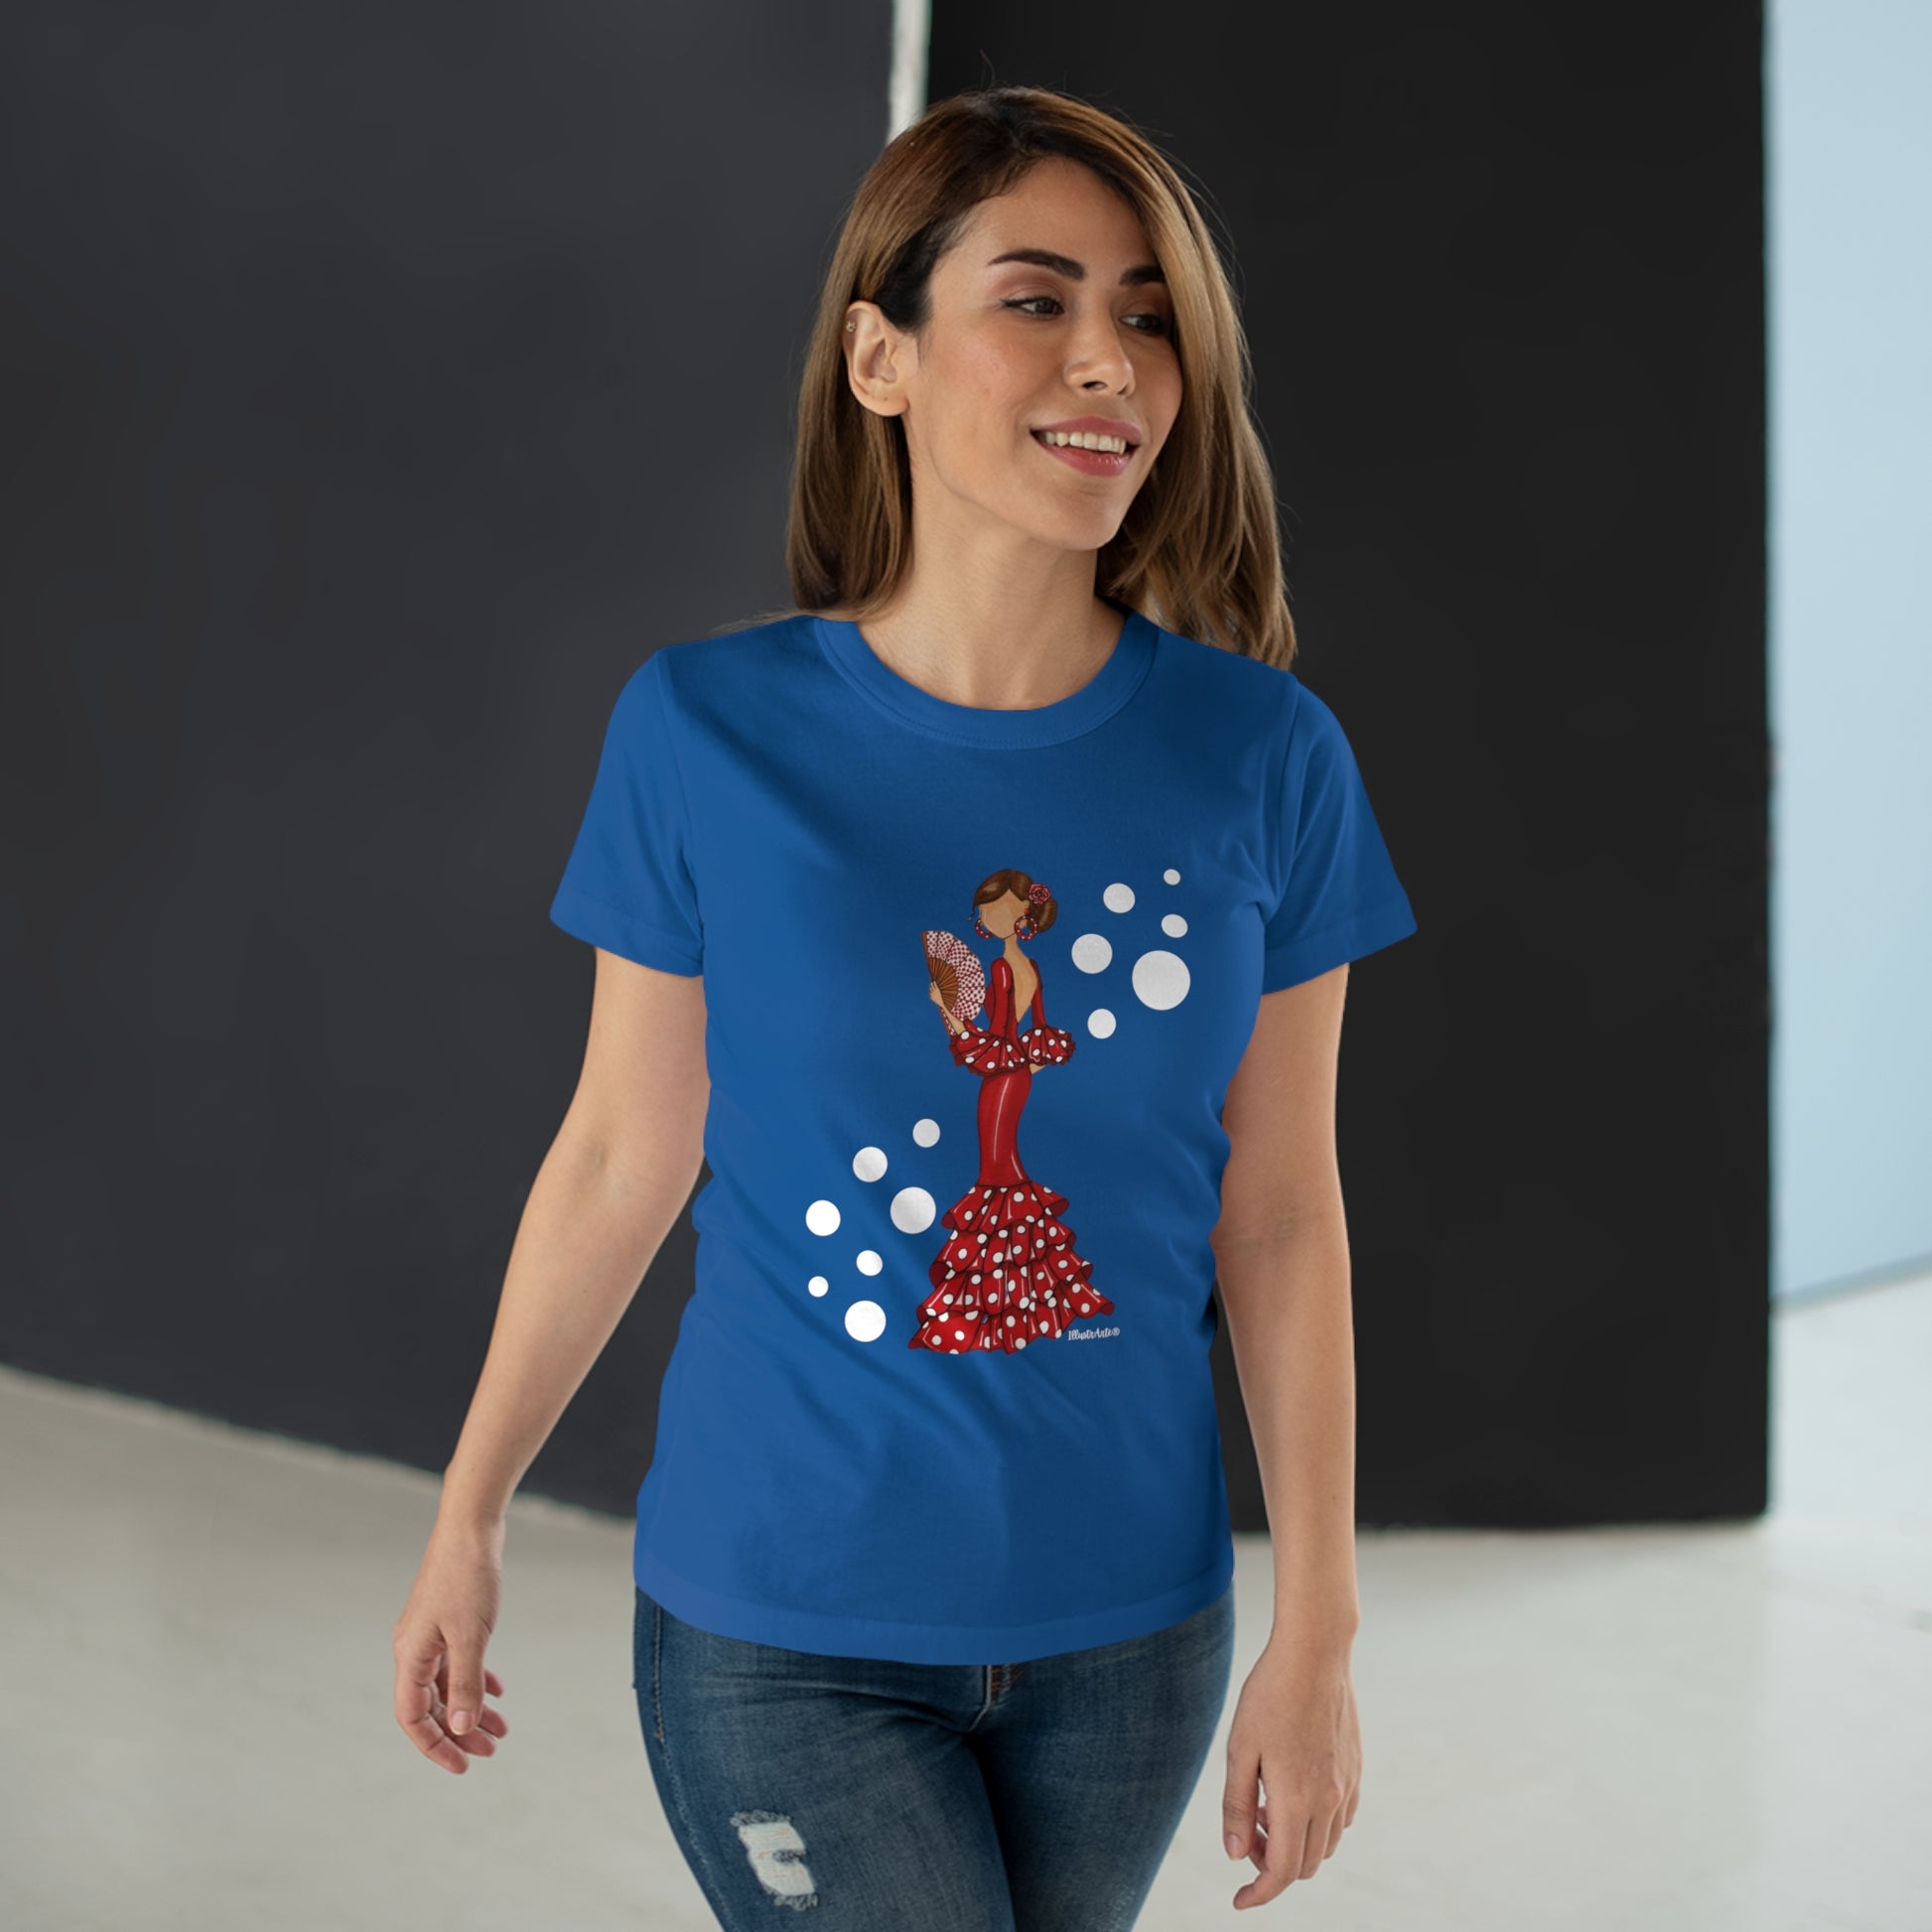 a woman wearing a blue t - shirt with a picture of a woman on it